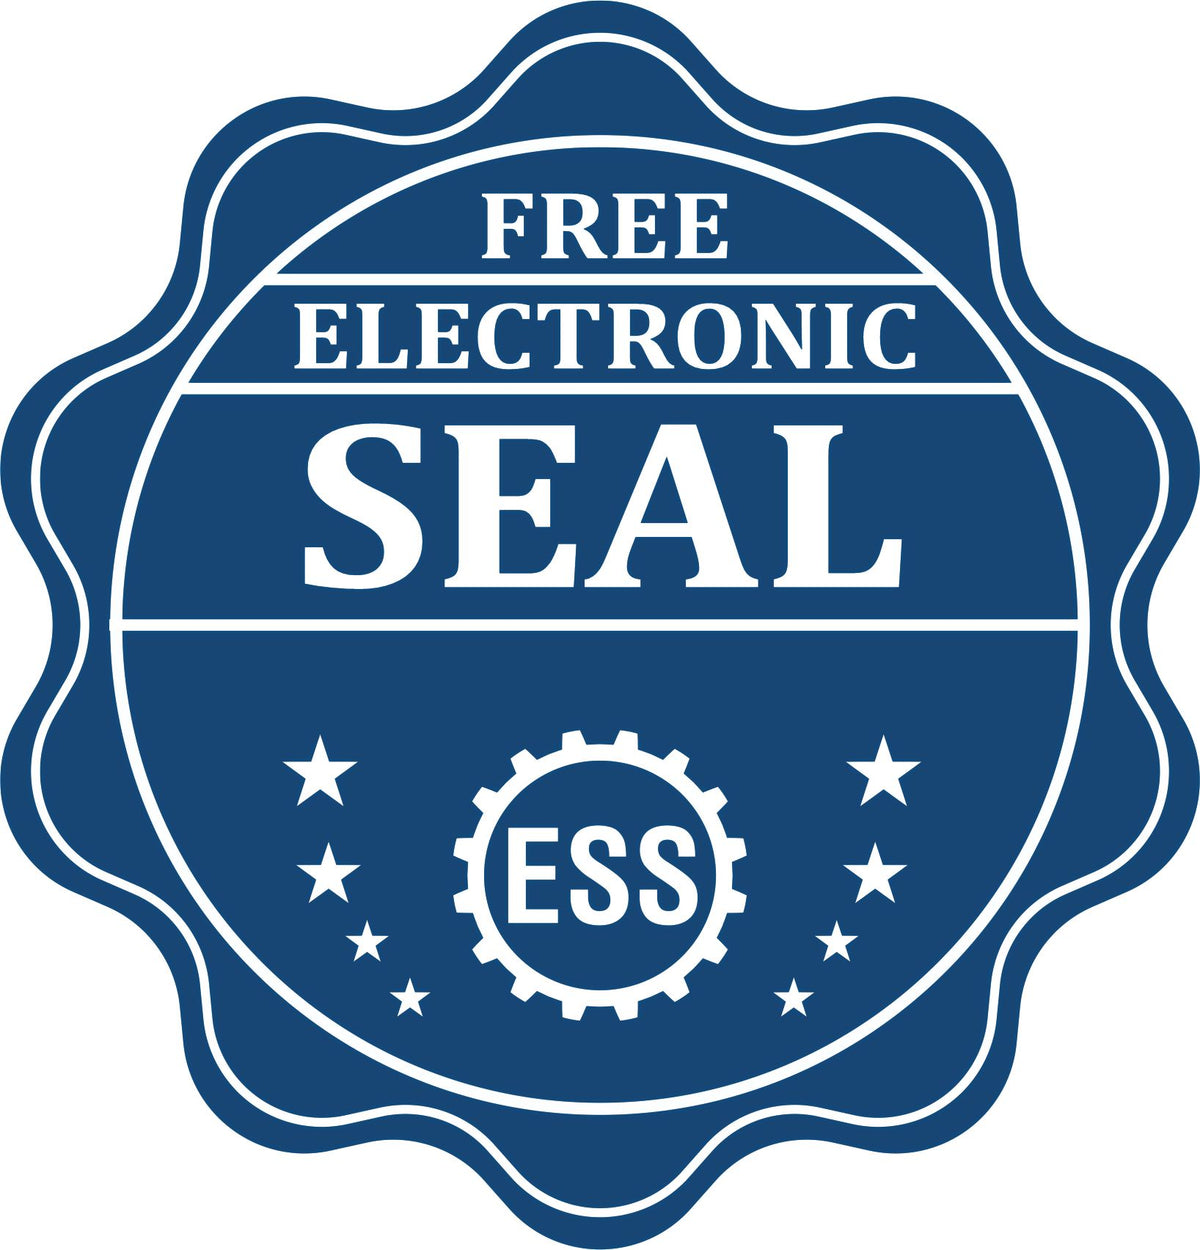 A badge showing a free electronic seal for the Premium MaxLight Pre-Inked Oregon Geology Stamp with stars and the ESS gear on the emblem.